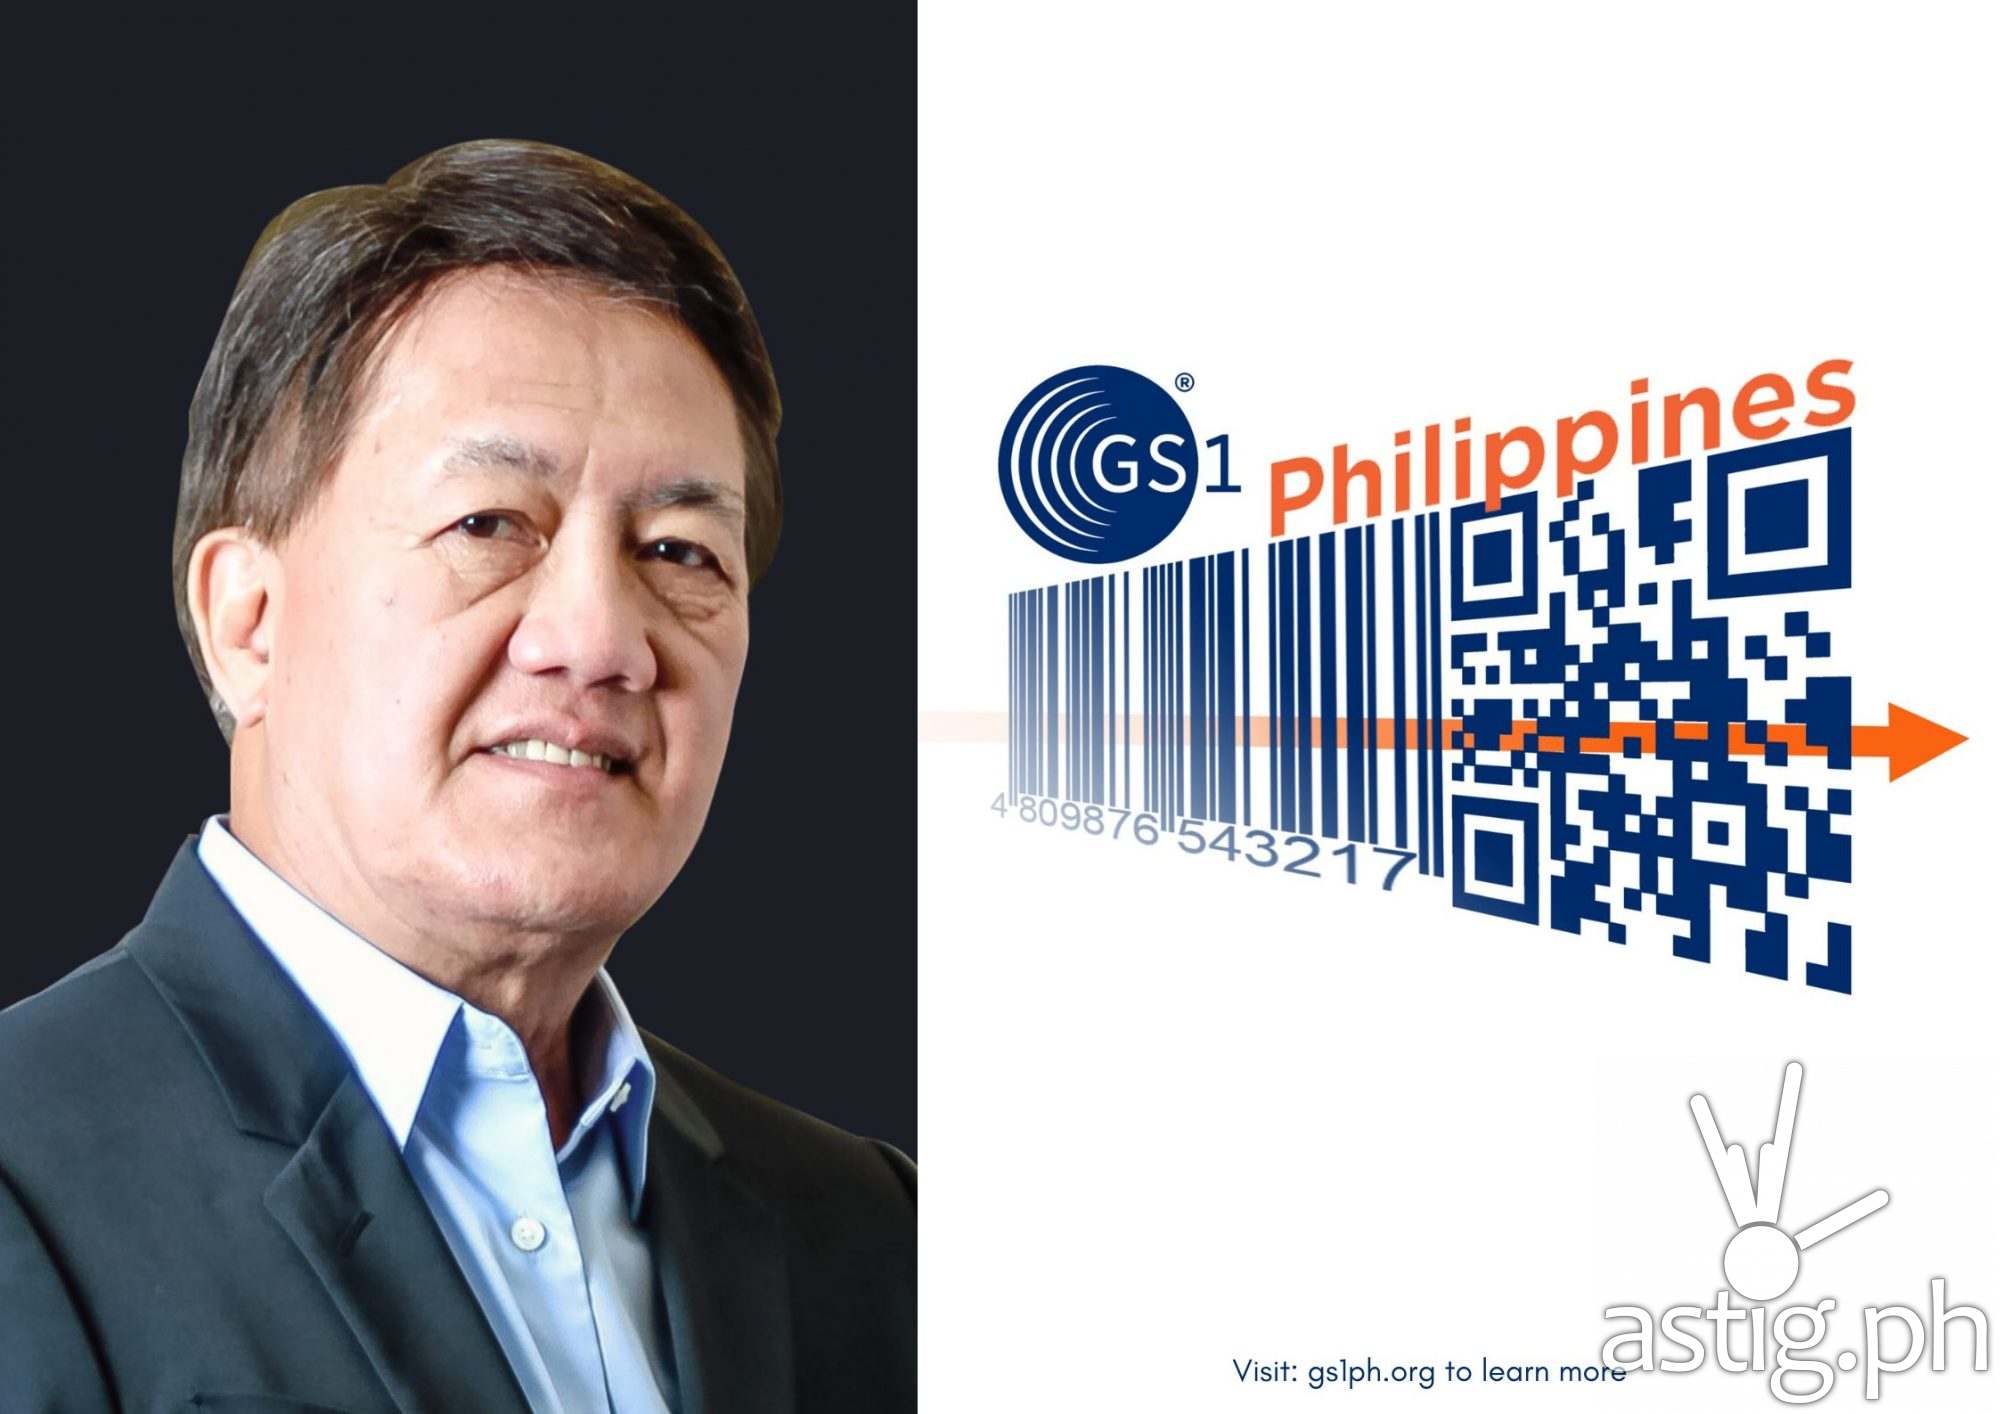 GS1 Philippines kicks off landmark shift from barcode to QR code to bolster local retail industry’s digital transformation